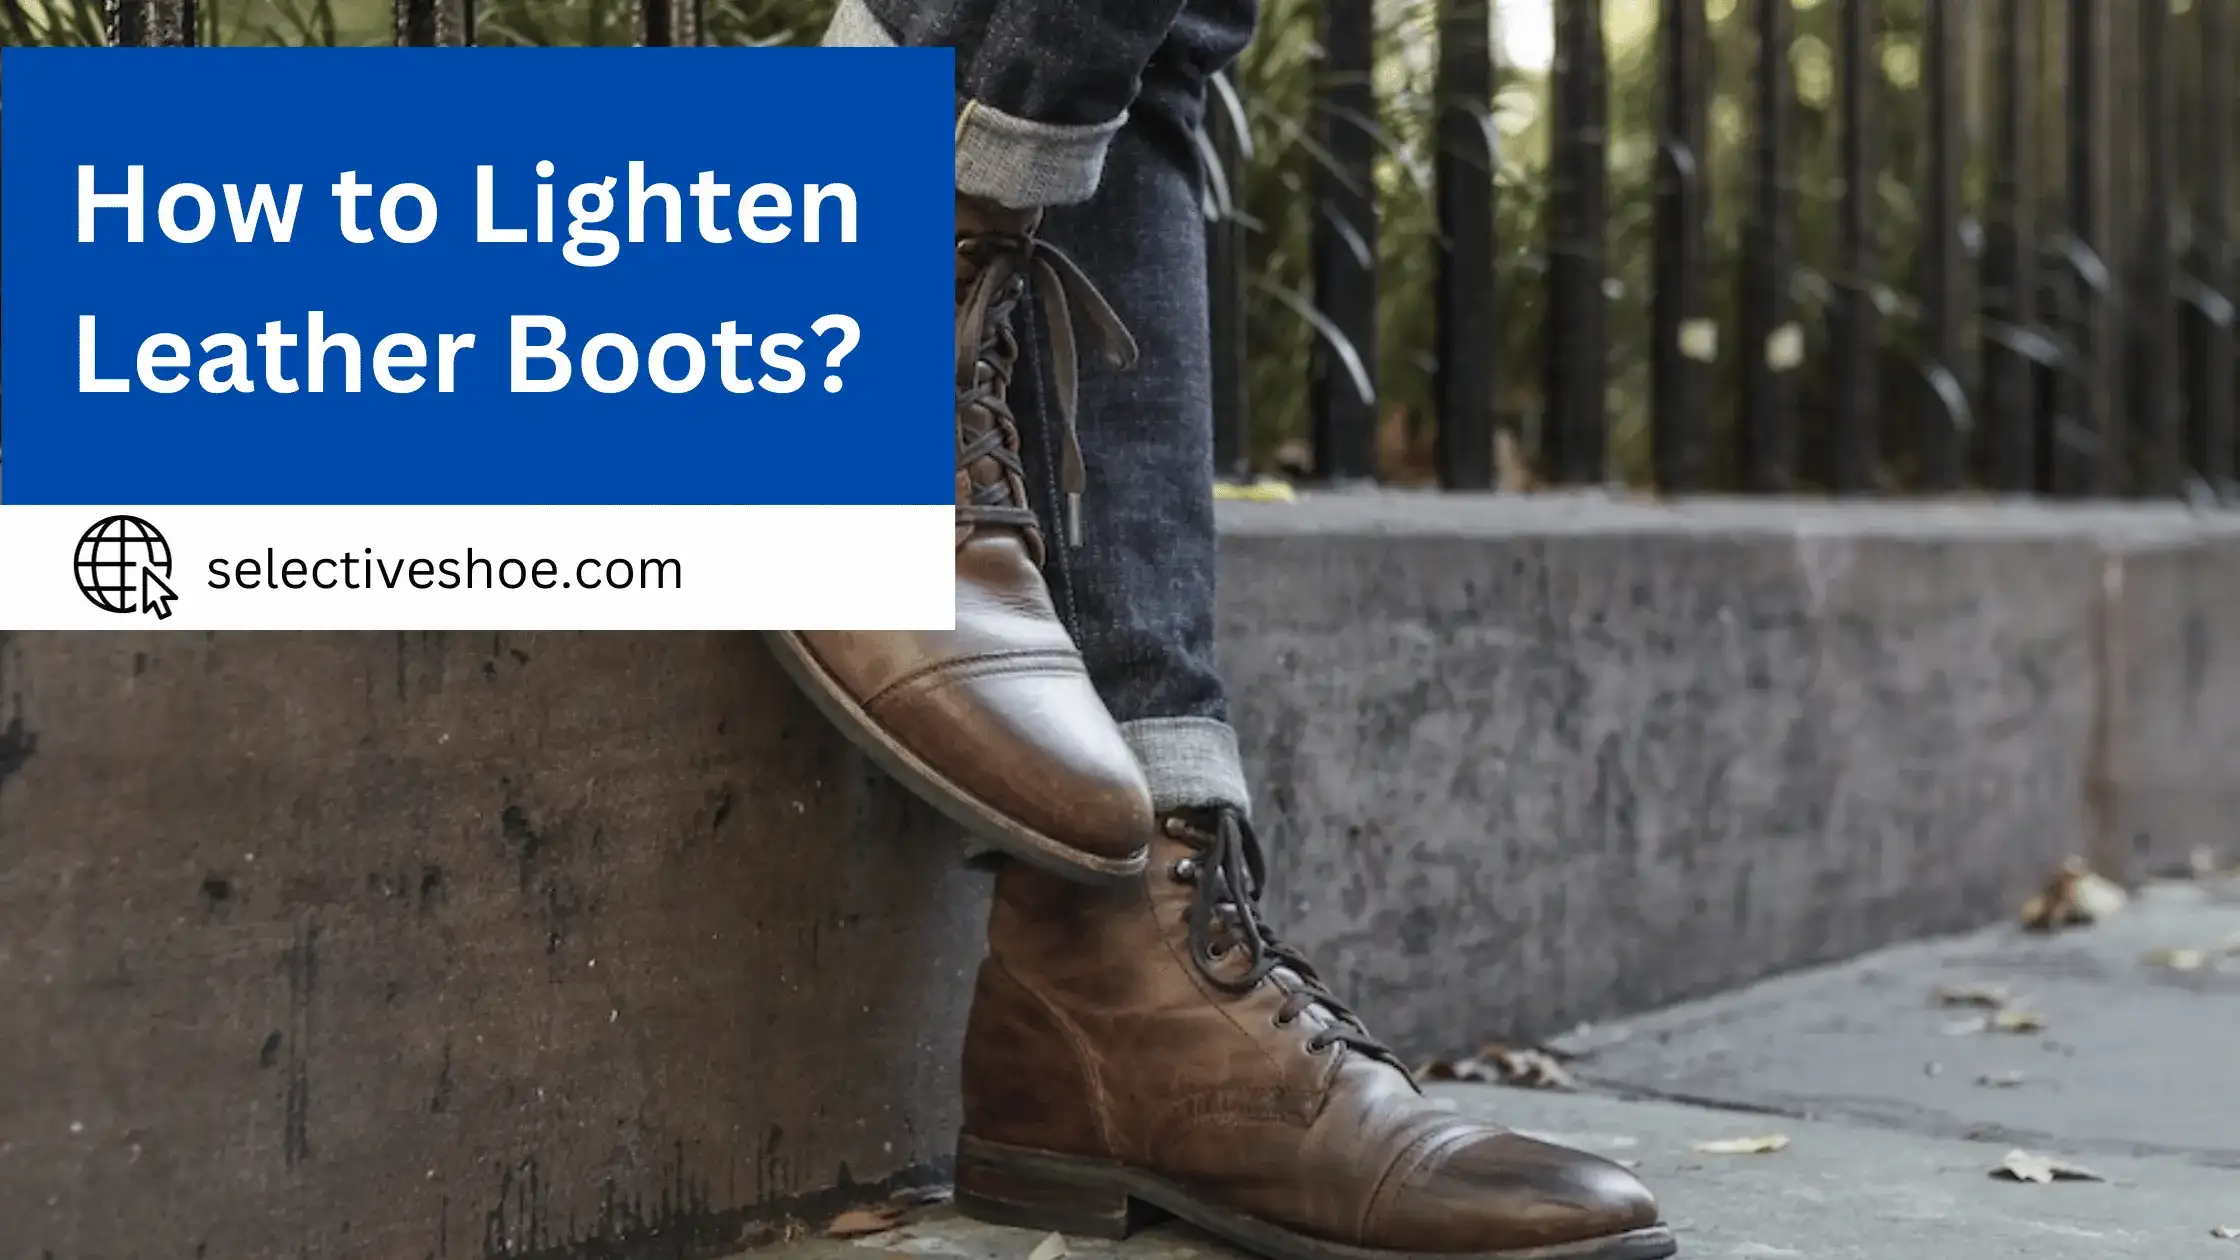 How To Lighten Leather Boots? Recommended Guide